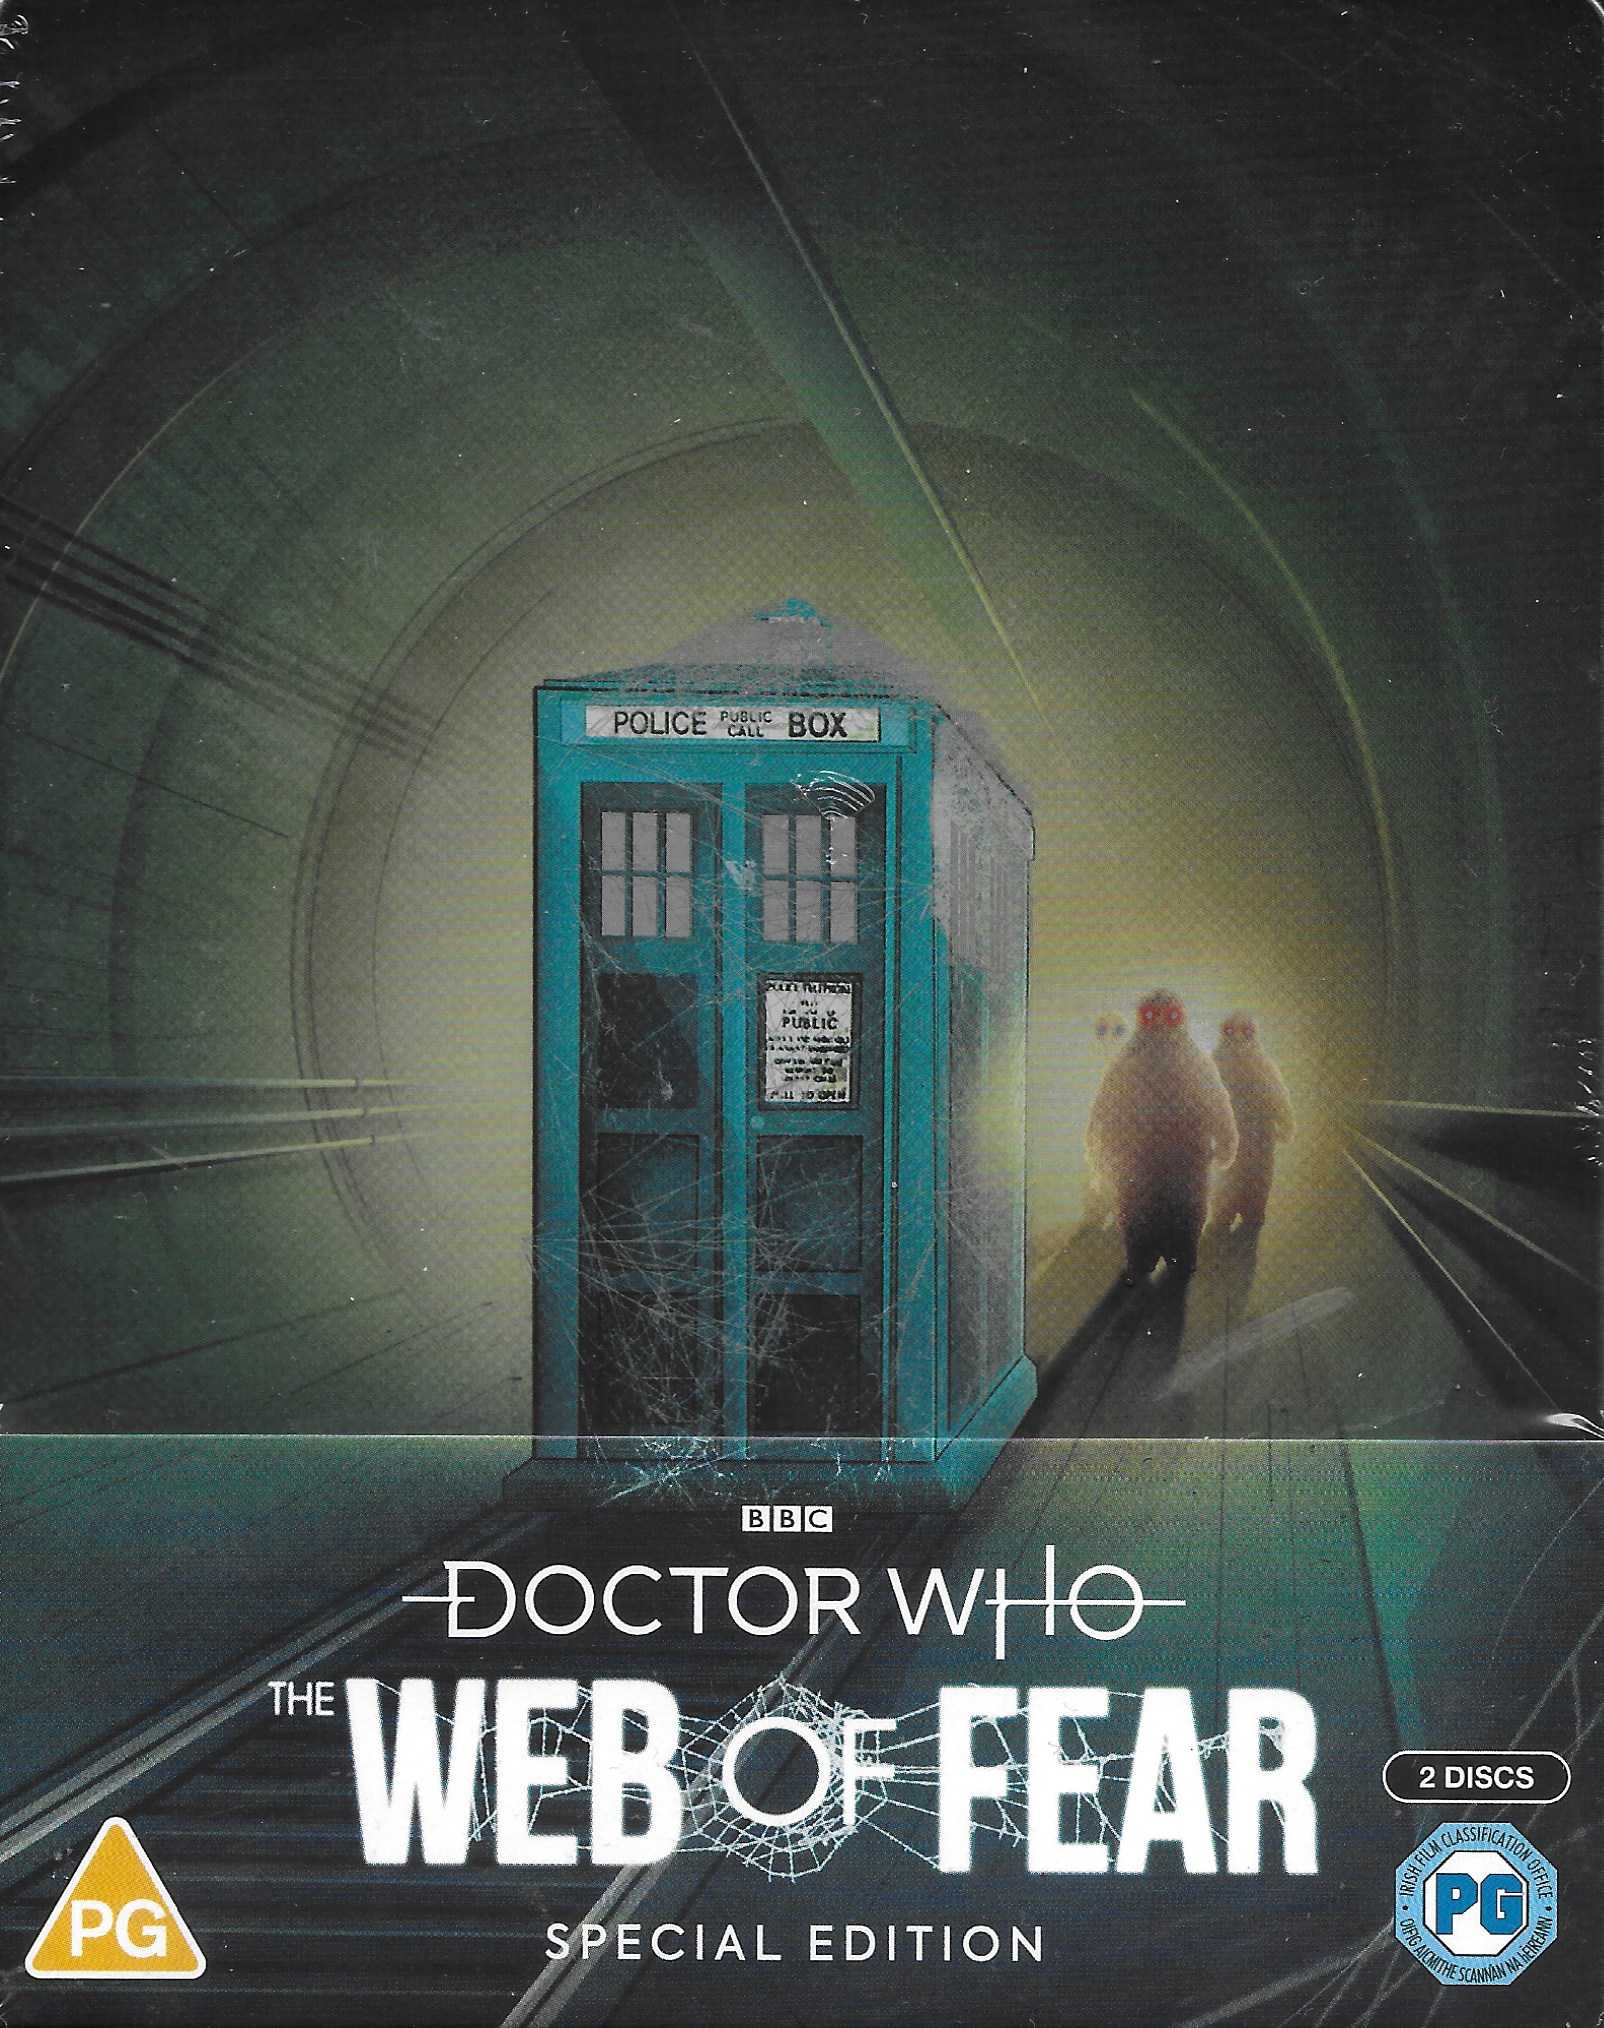 Picture of BBCBD 0522 Doctor Who - The web of fear by artist Mervyn Haisman / Henry Lincoln from the BBC blu-rays - Records and Tapes library